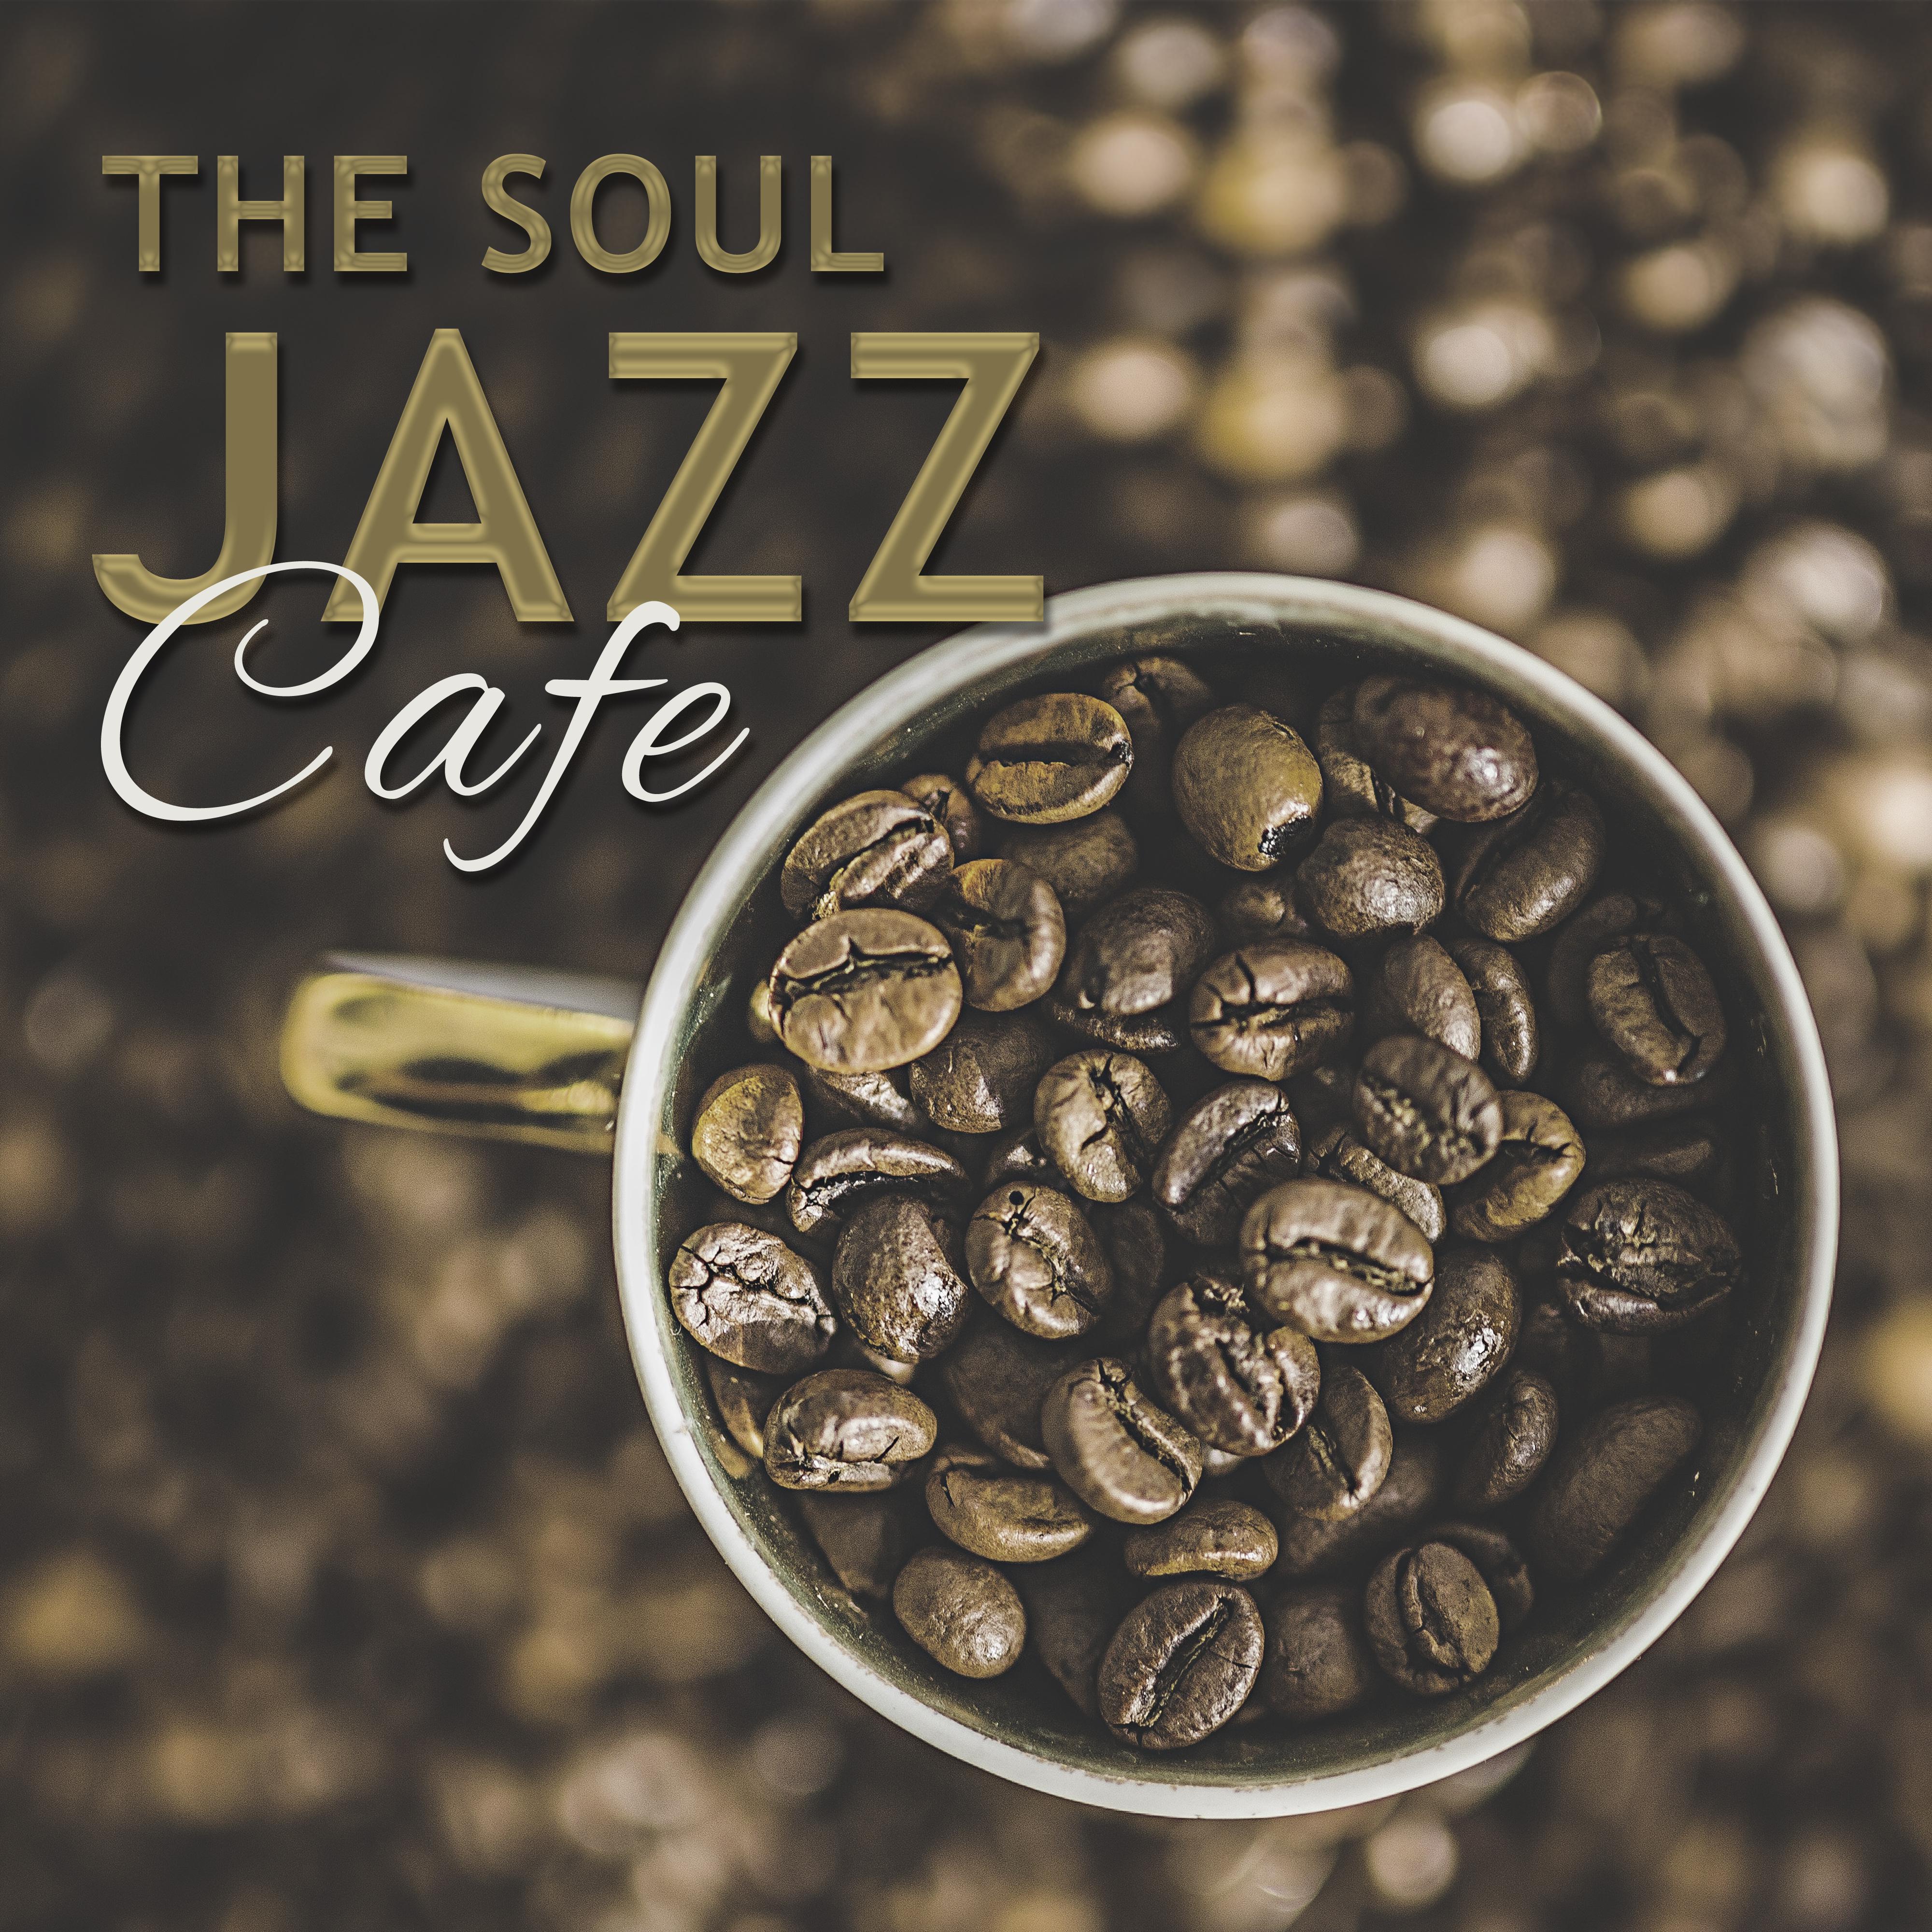 The Soul  Jazz Cafe  Mellow Piano, Smooth Jazz, Cafe Music, Ambient Instrumental Music for Cafe  Restaurant, Slow Tempo